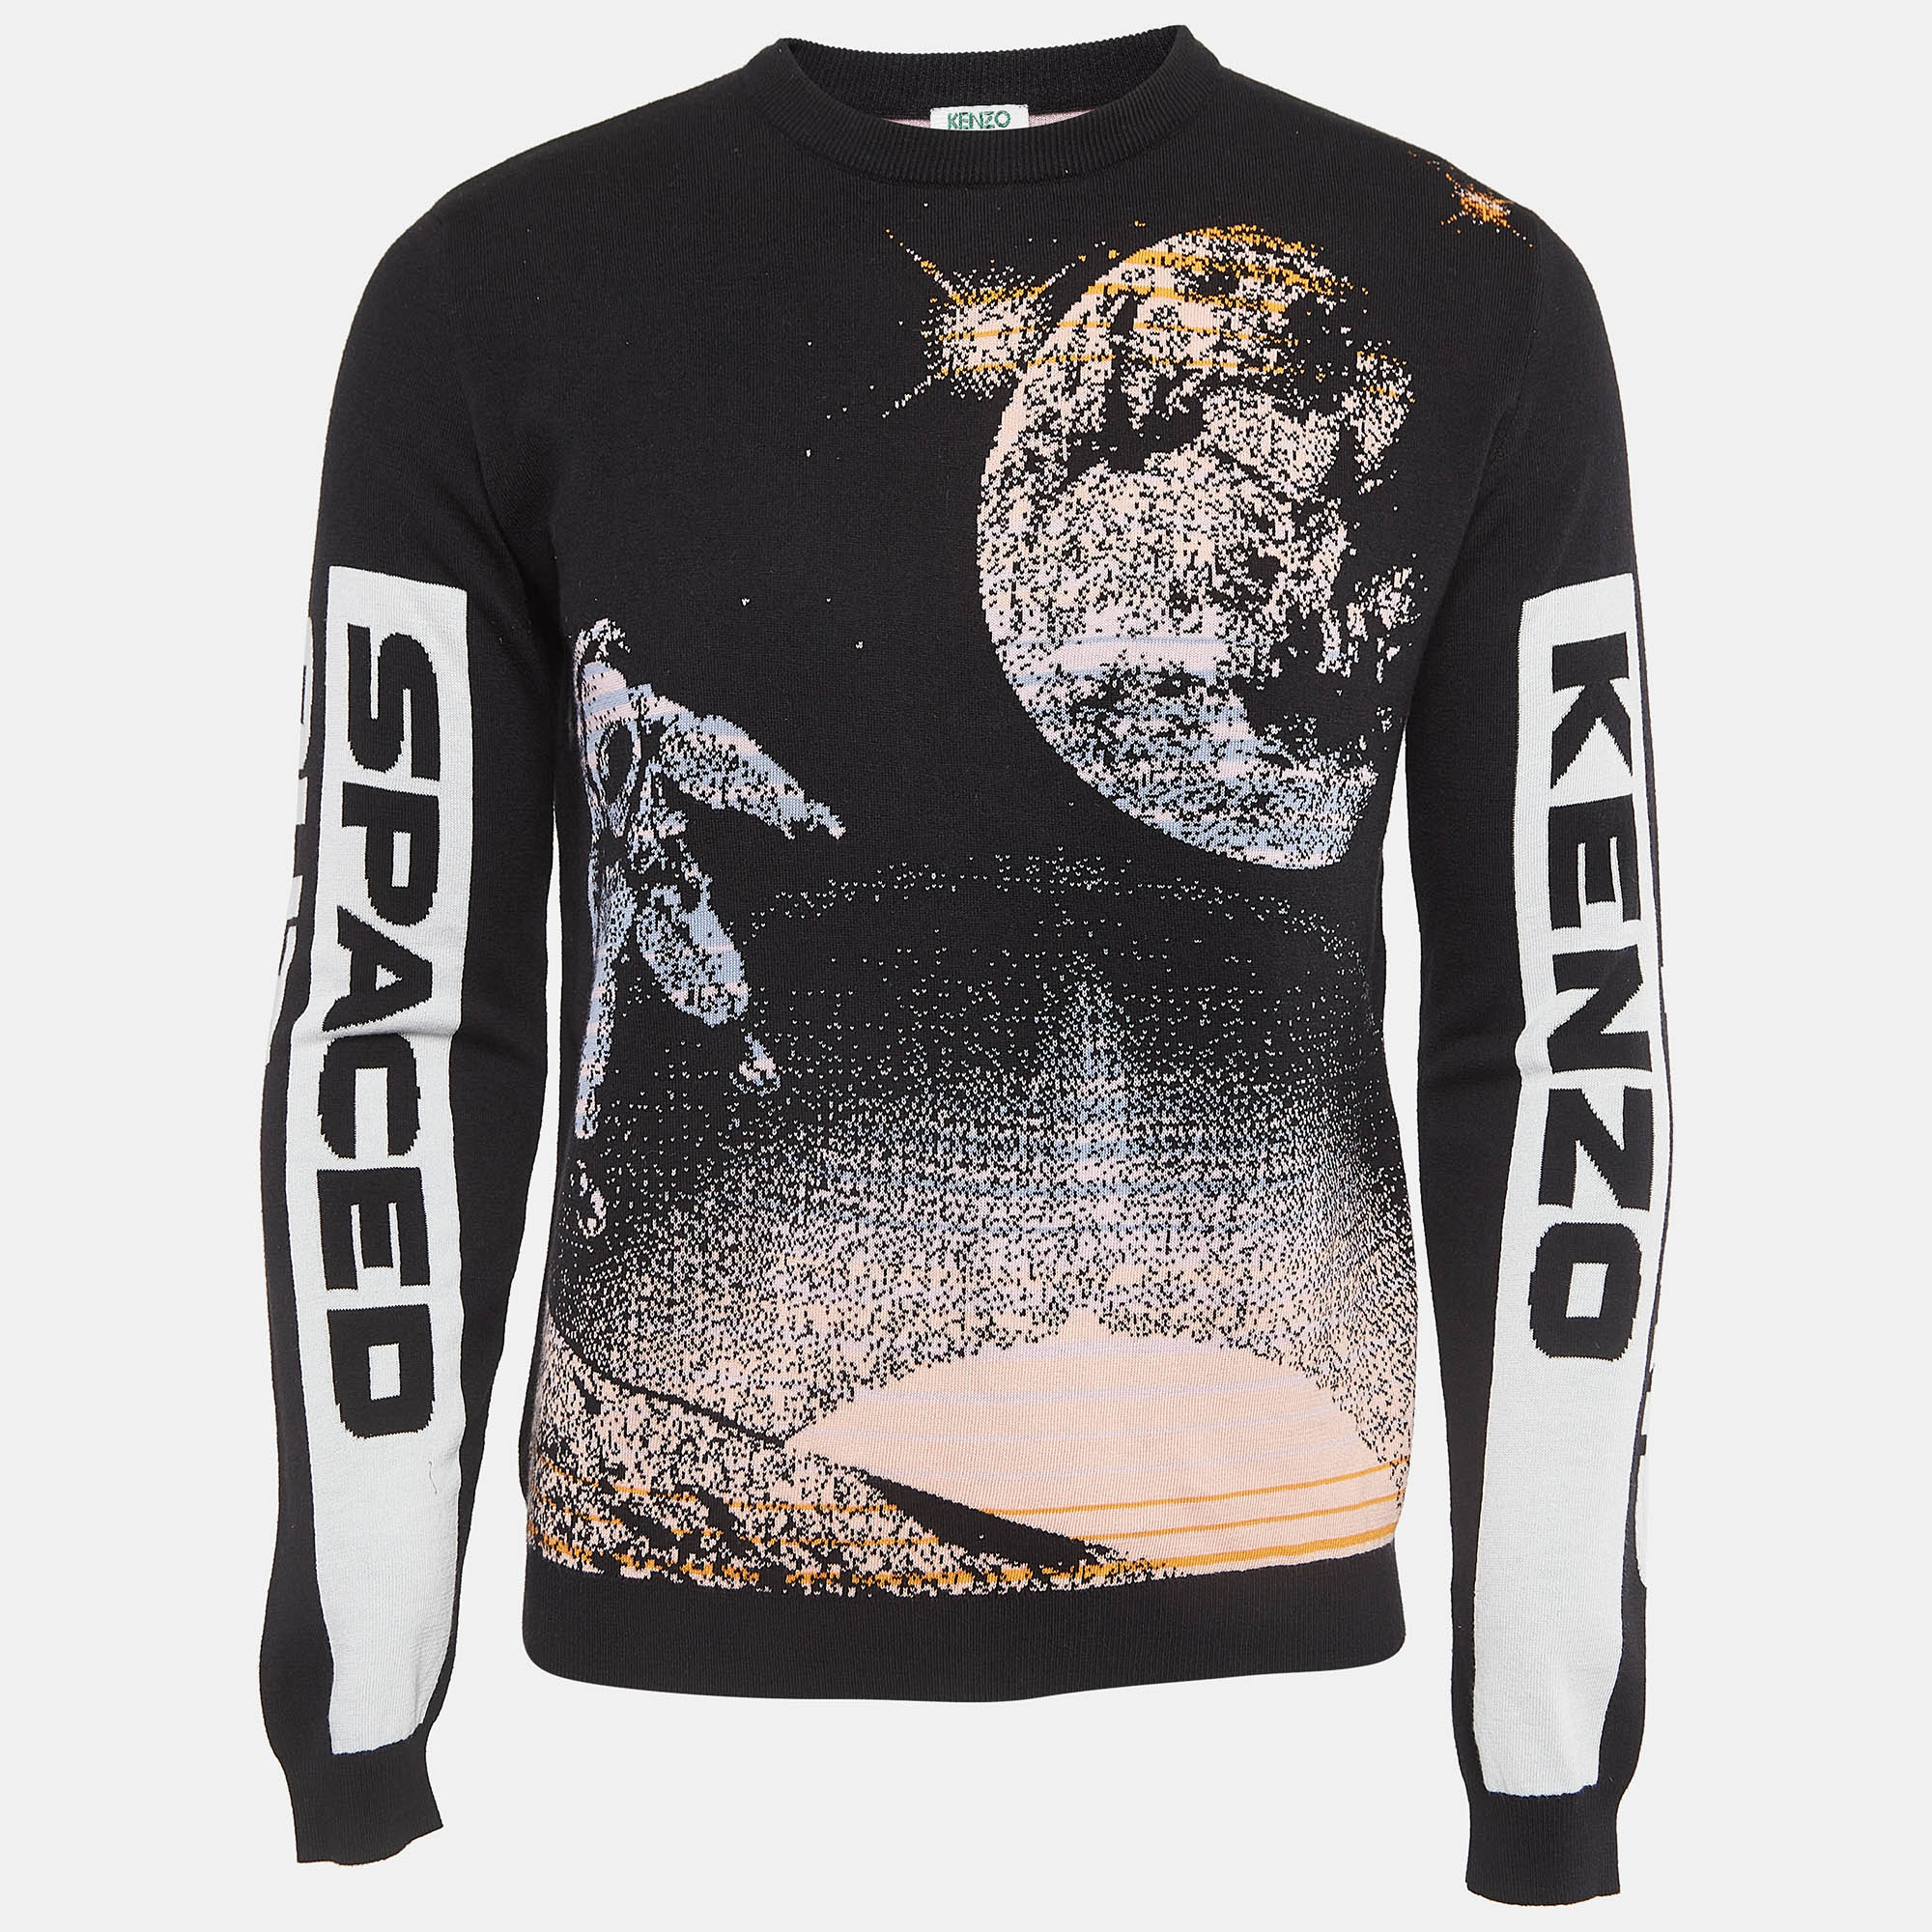 Pre-owned Kenzo Black Spaced Out Intarsia Knit Crew Neck Sweatshirt S